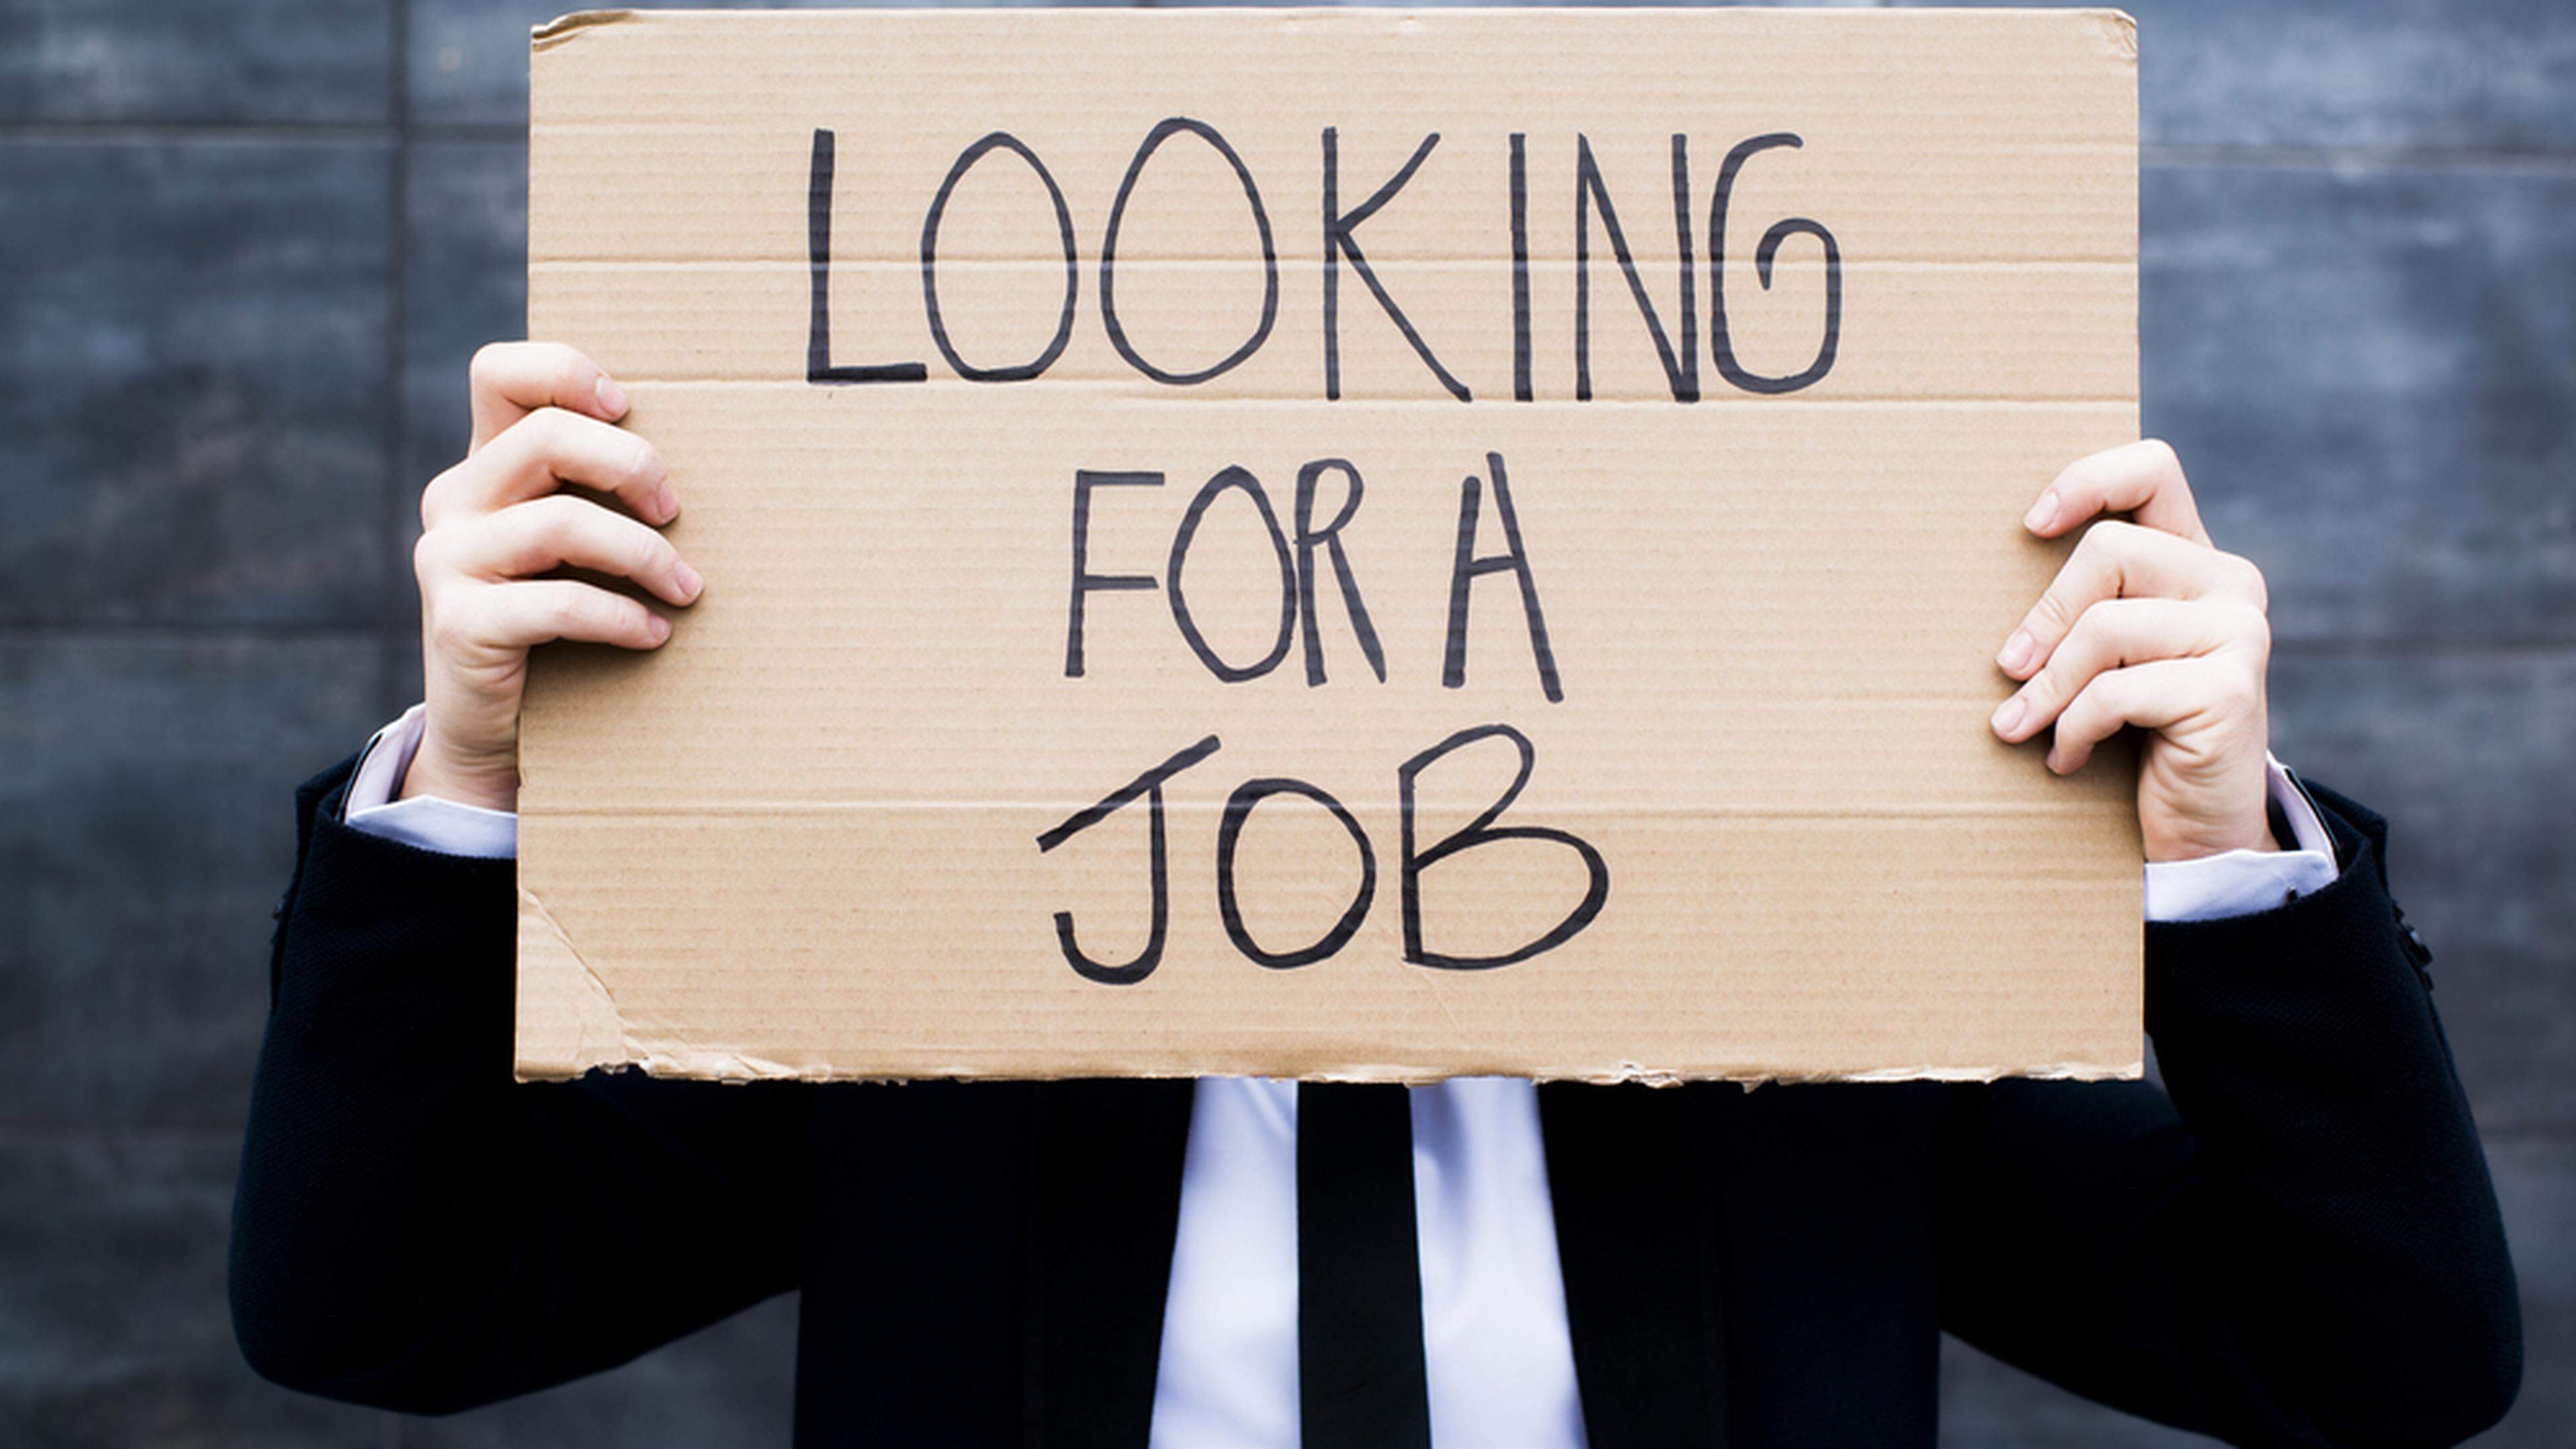 A person holding a sign “Looking for a job”